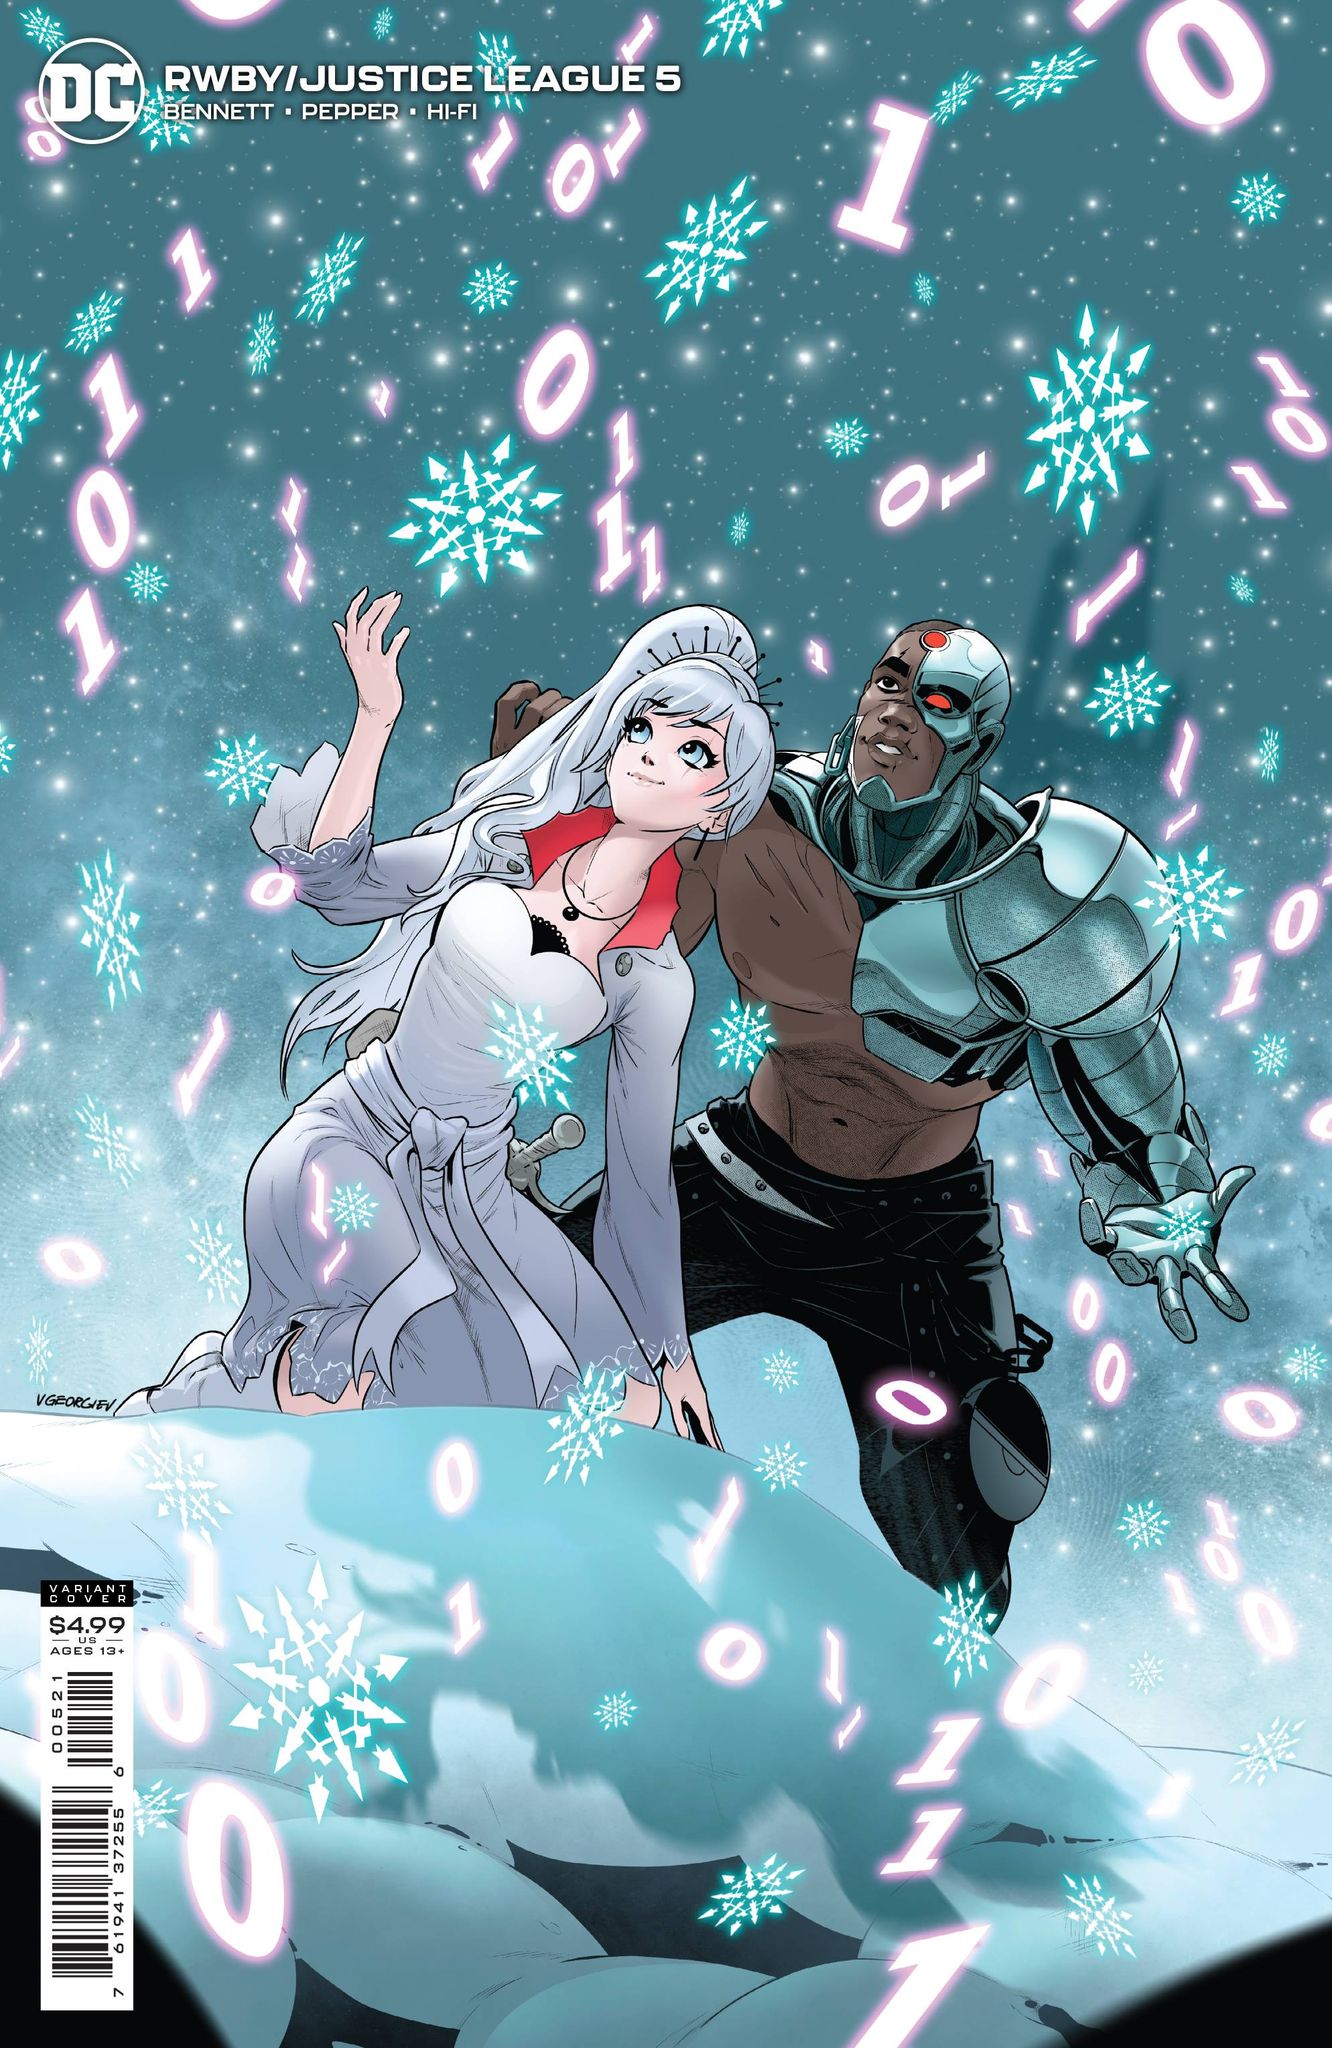 RWBY Justice League #5 Cover B Simone Di Meo Card Stock Variant (Of 7)